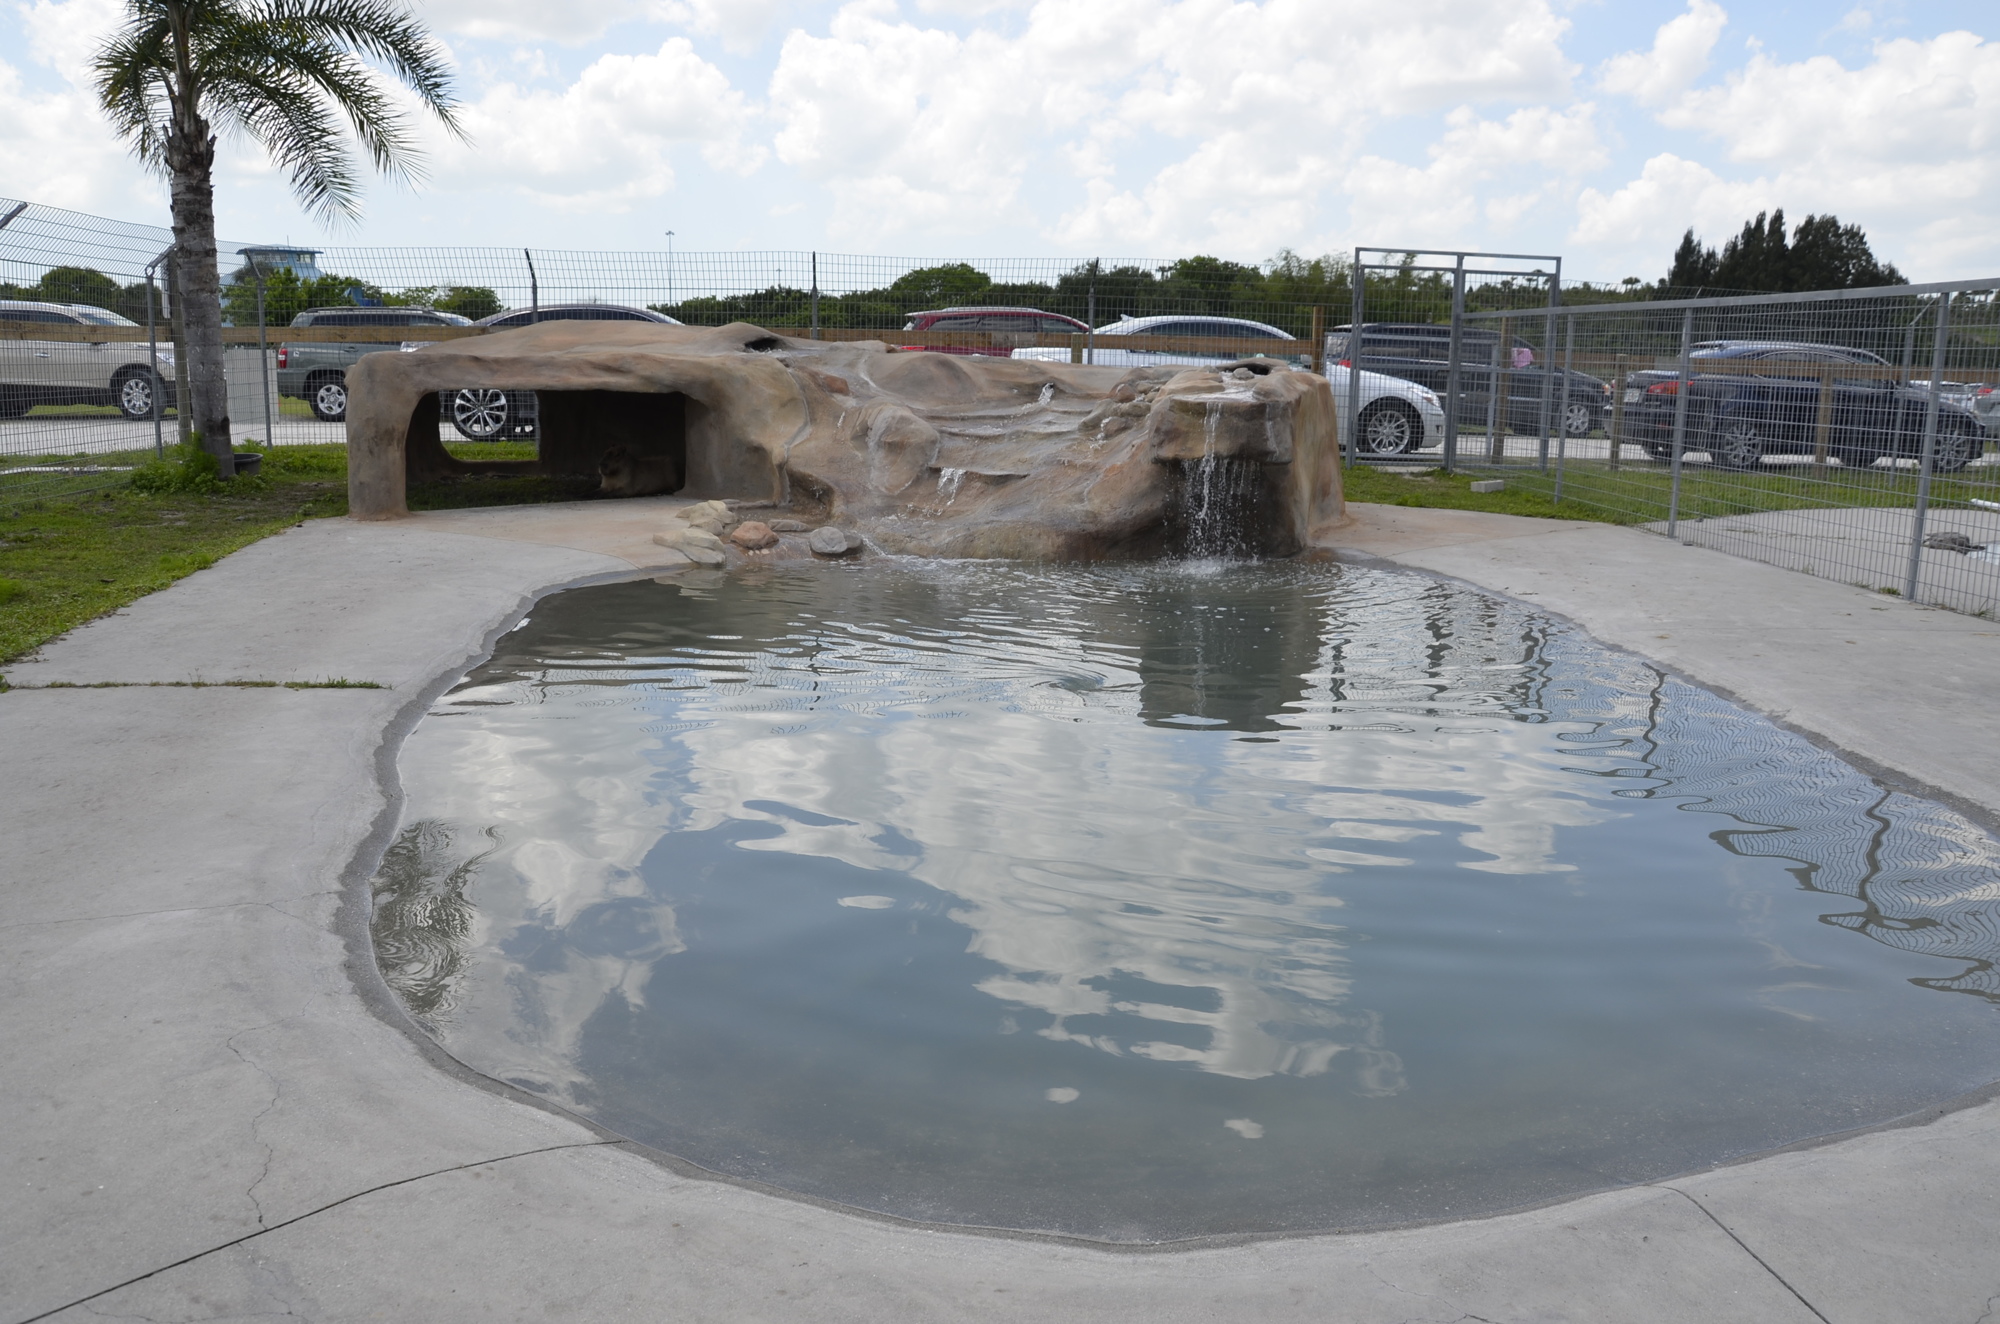 Bob's new and improved enclosure includes a structure made by Incredible Creations, a creative cement company out of Bradenton. The company donated the labor to complete the project.